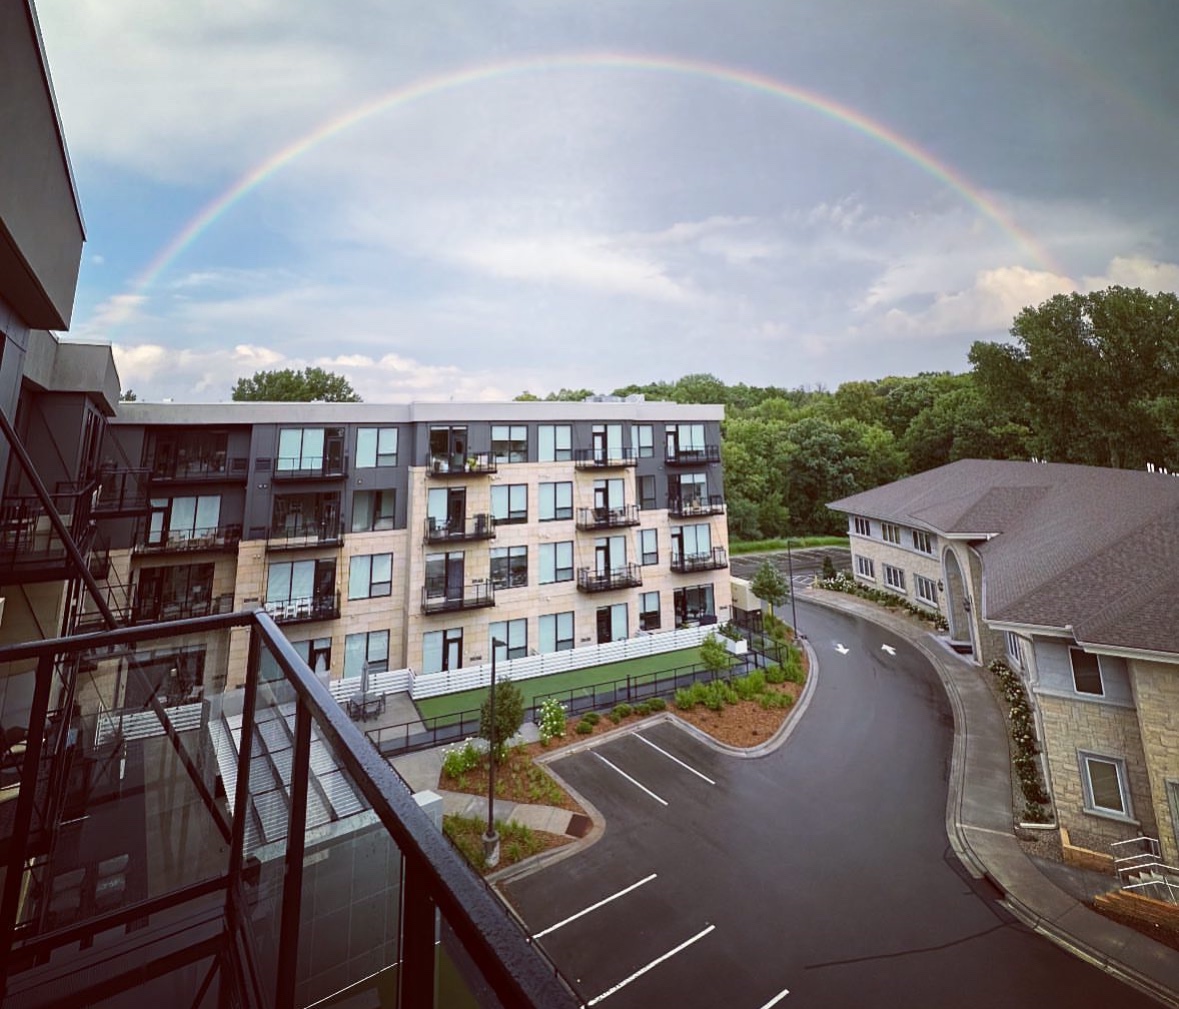 Find your rainbow at The Luxe 🌈
#luxuryliving #luxuryapartments #luxuryapartmentsminnetonka #mnapartments #minnetonka #apartmentsforrent #apartmentsearch #apartmentliving #apartment #minnesota #minnesotalife #minnetonkalife